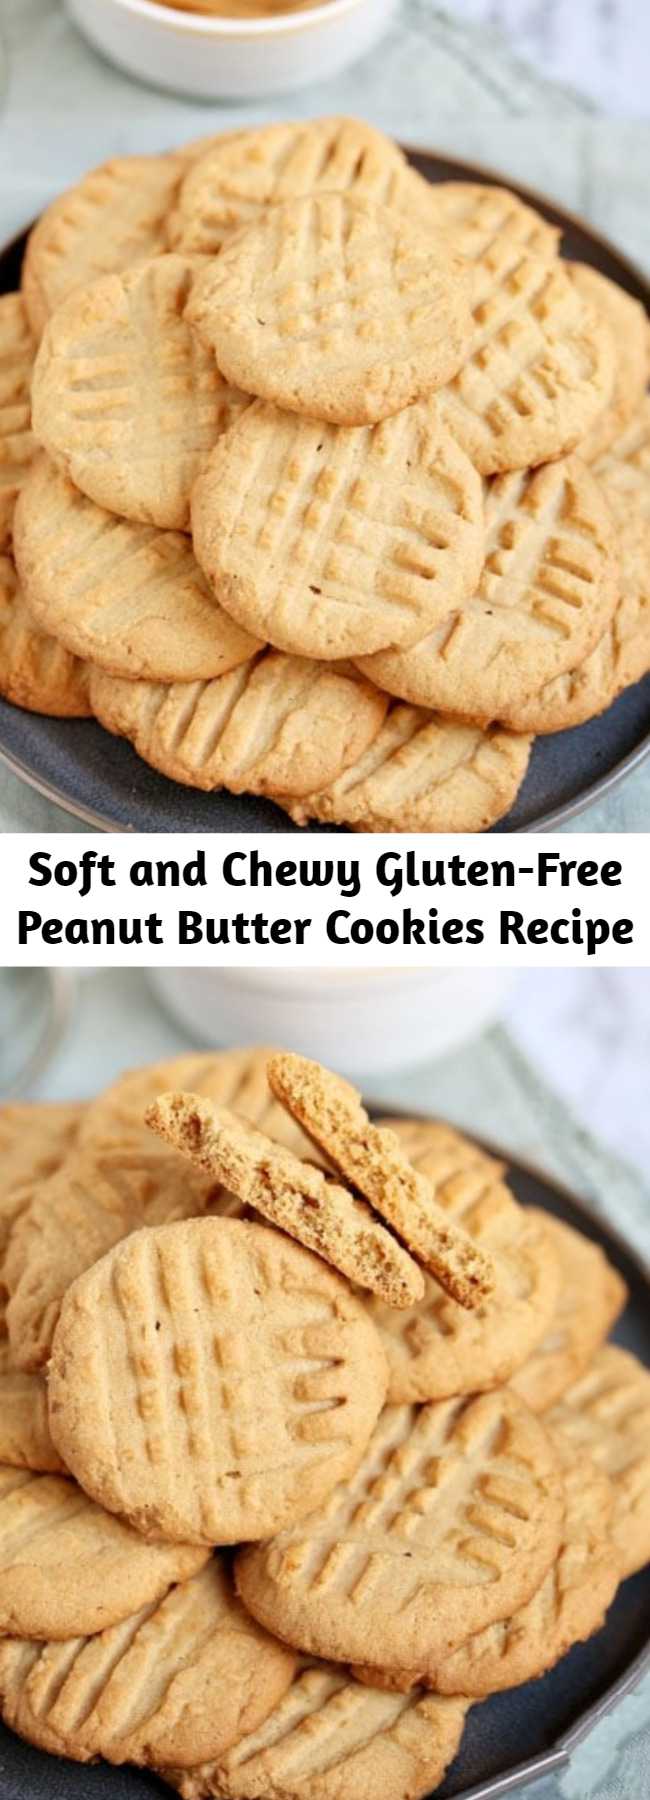 Soft and Chewy Gluten-Free Peanut Butter Cookies Recipe - This easy recipe uses common ingredients that make a peanut butter cookie so delicious, no one will guess it’s gluten-free! Unlike many GF cookie recipes, these gluten free peanut butter cookies are delicious and chewy, not dry and crumbly.